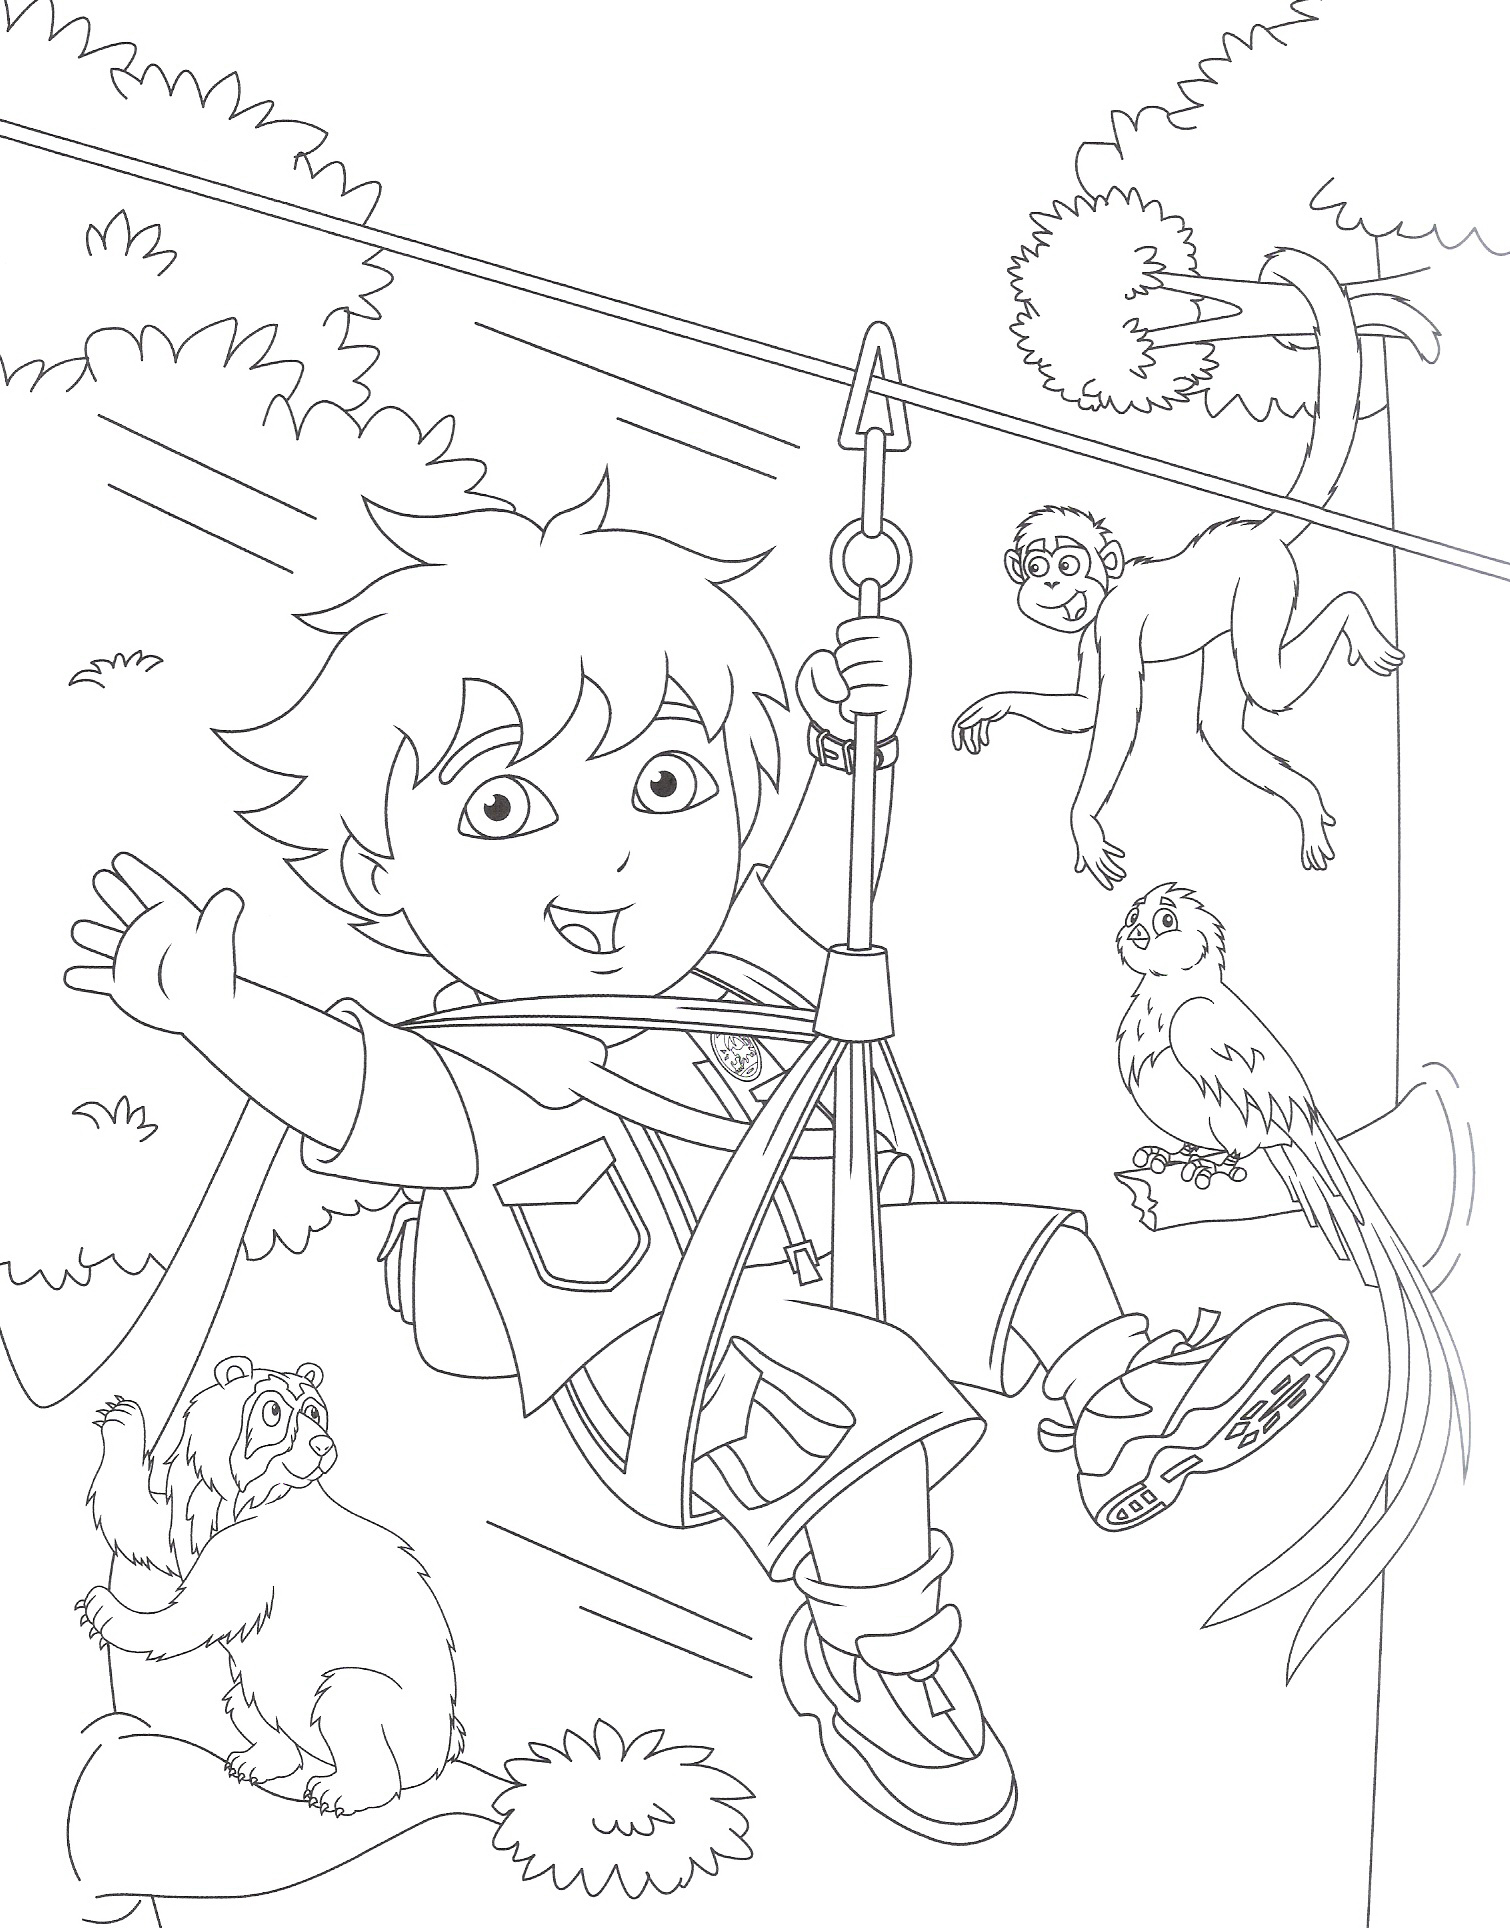 go diego go coloring pages